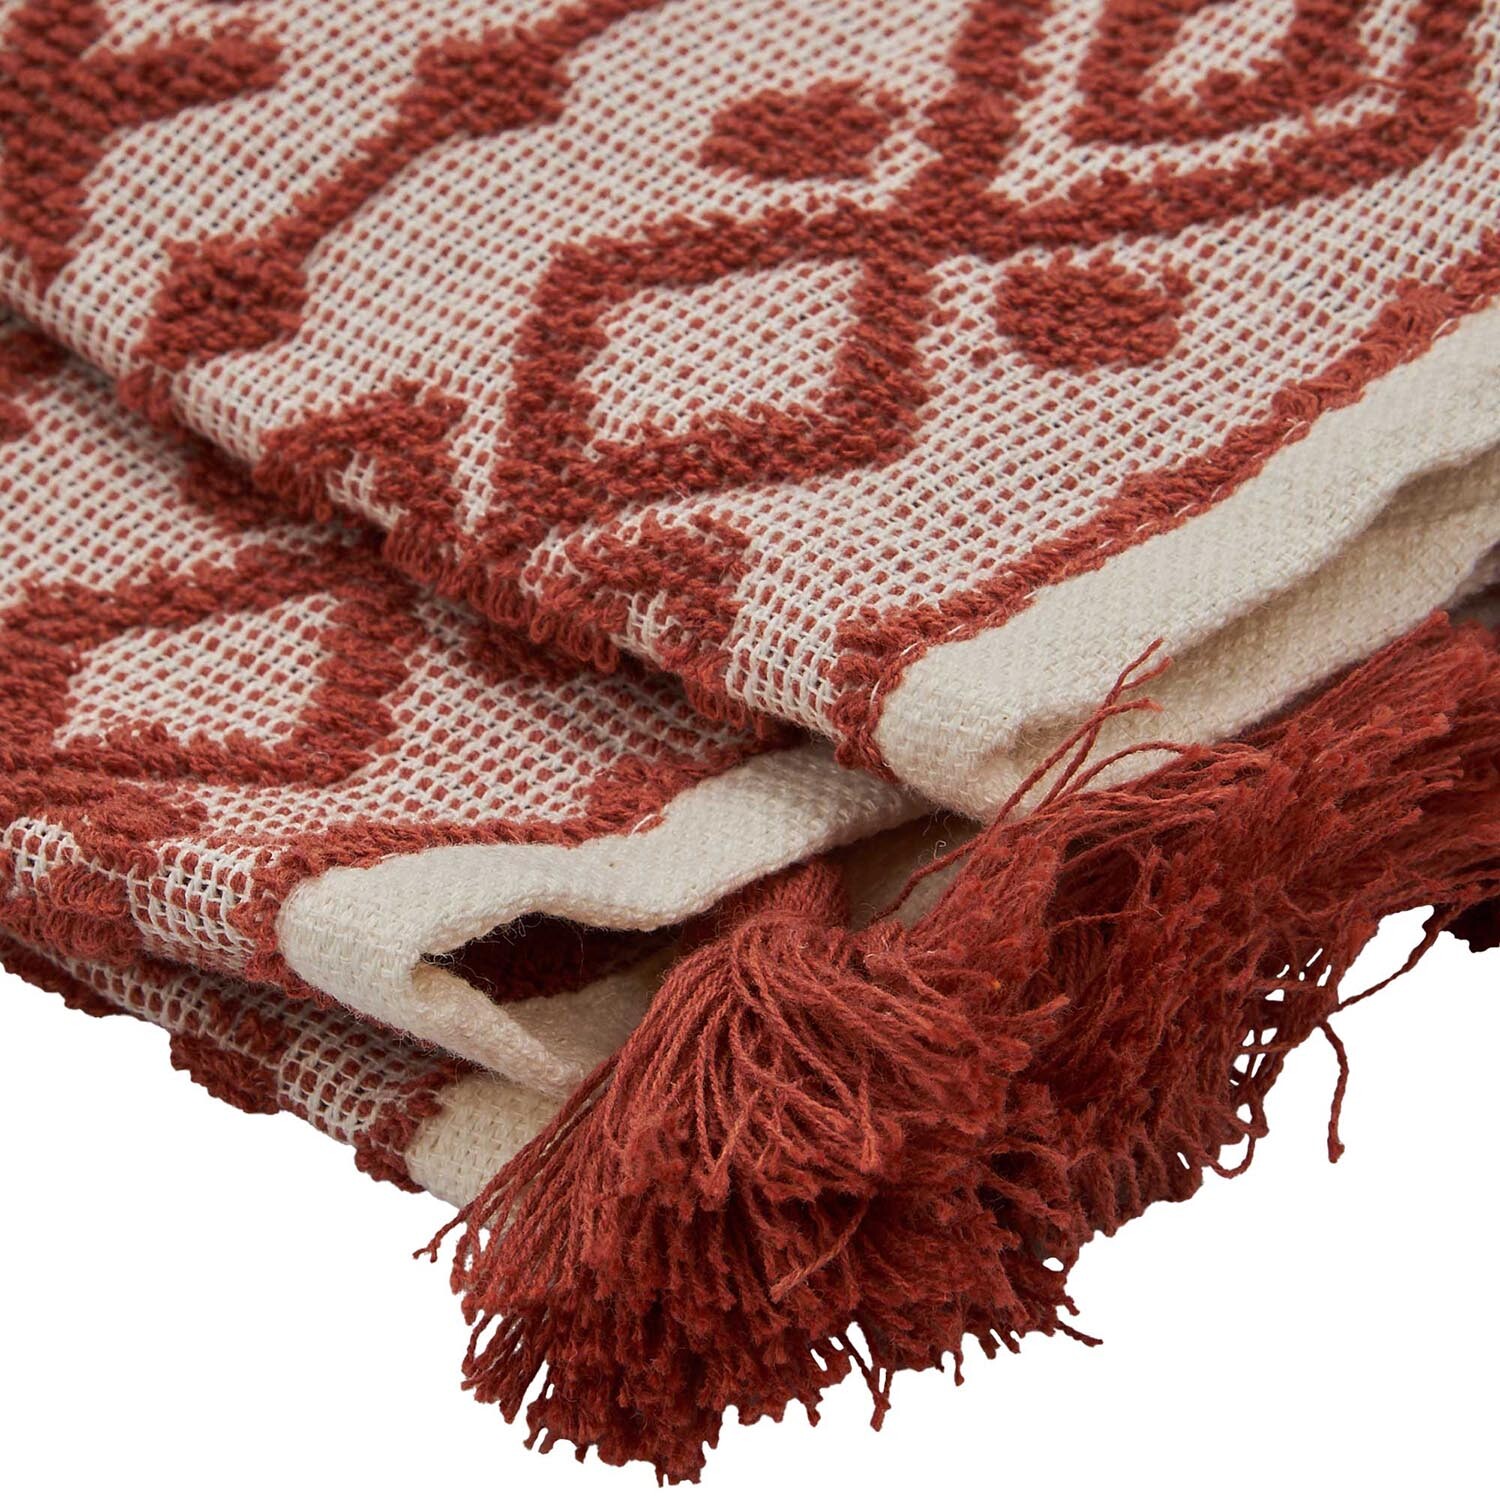 Pack of 2 Jacquard Terry Kitchen Towels with Tassels - Burnt Orange Image 4